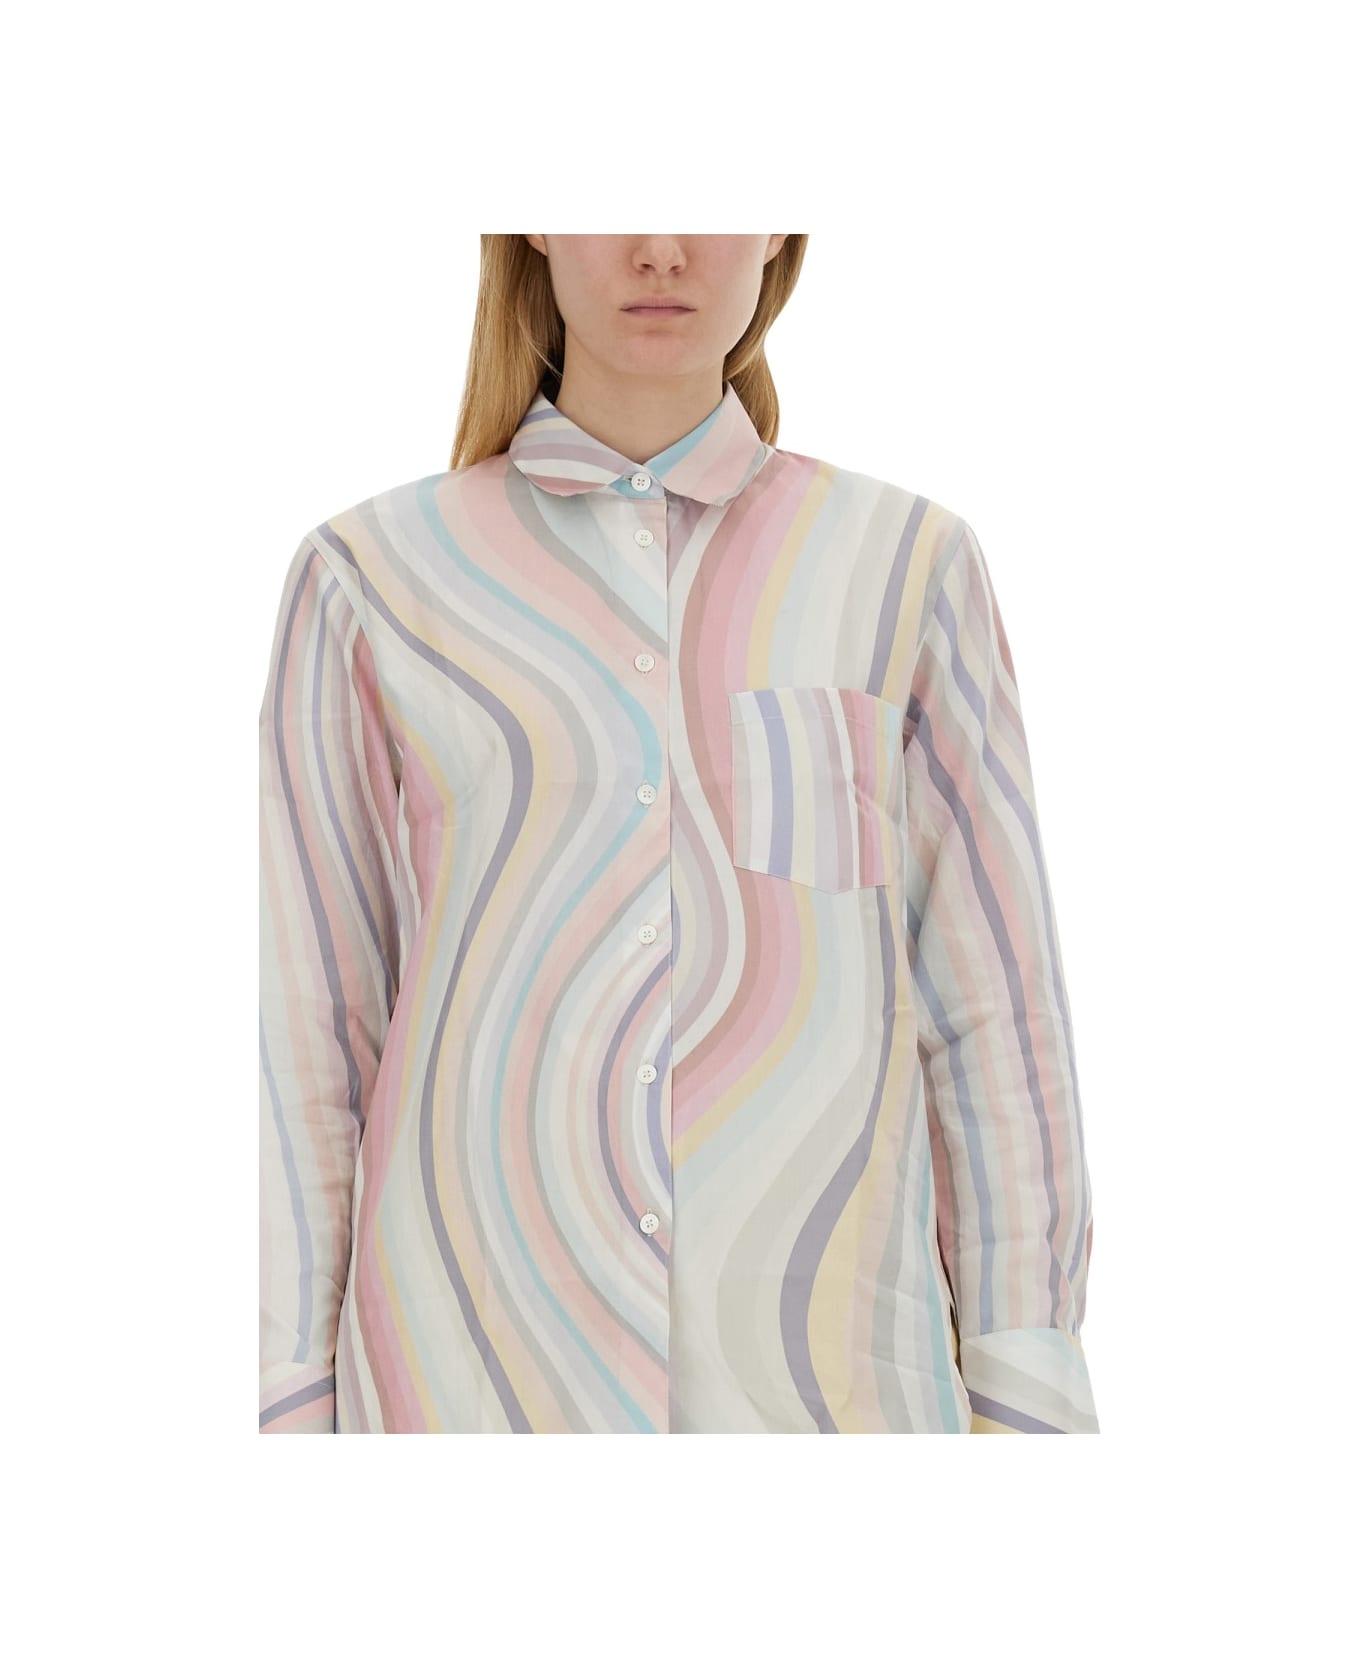 PS by Paul Smith 'faded Swirl' Shirt - MULTICOLOUR シャツ